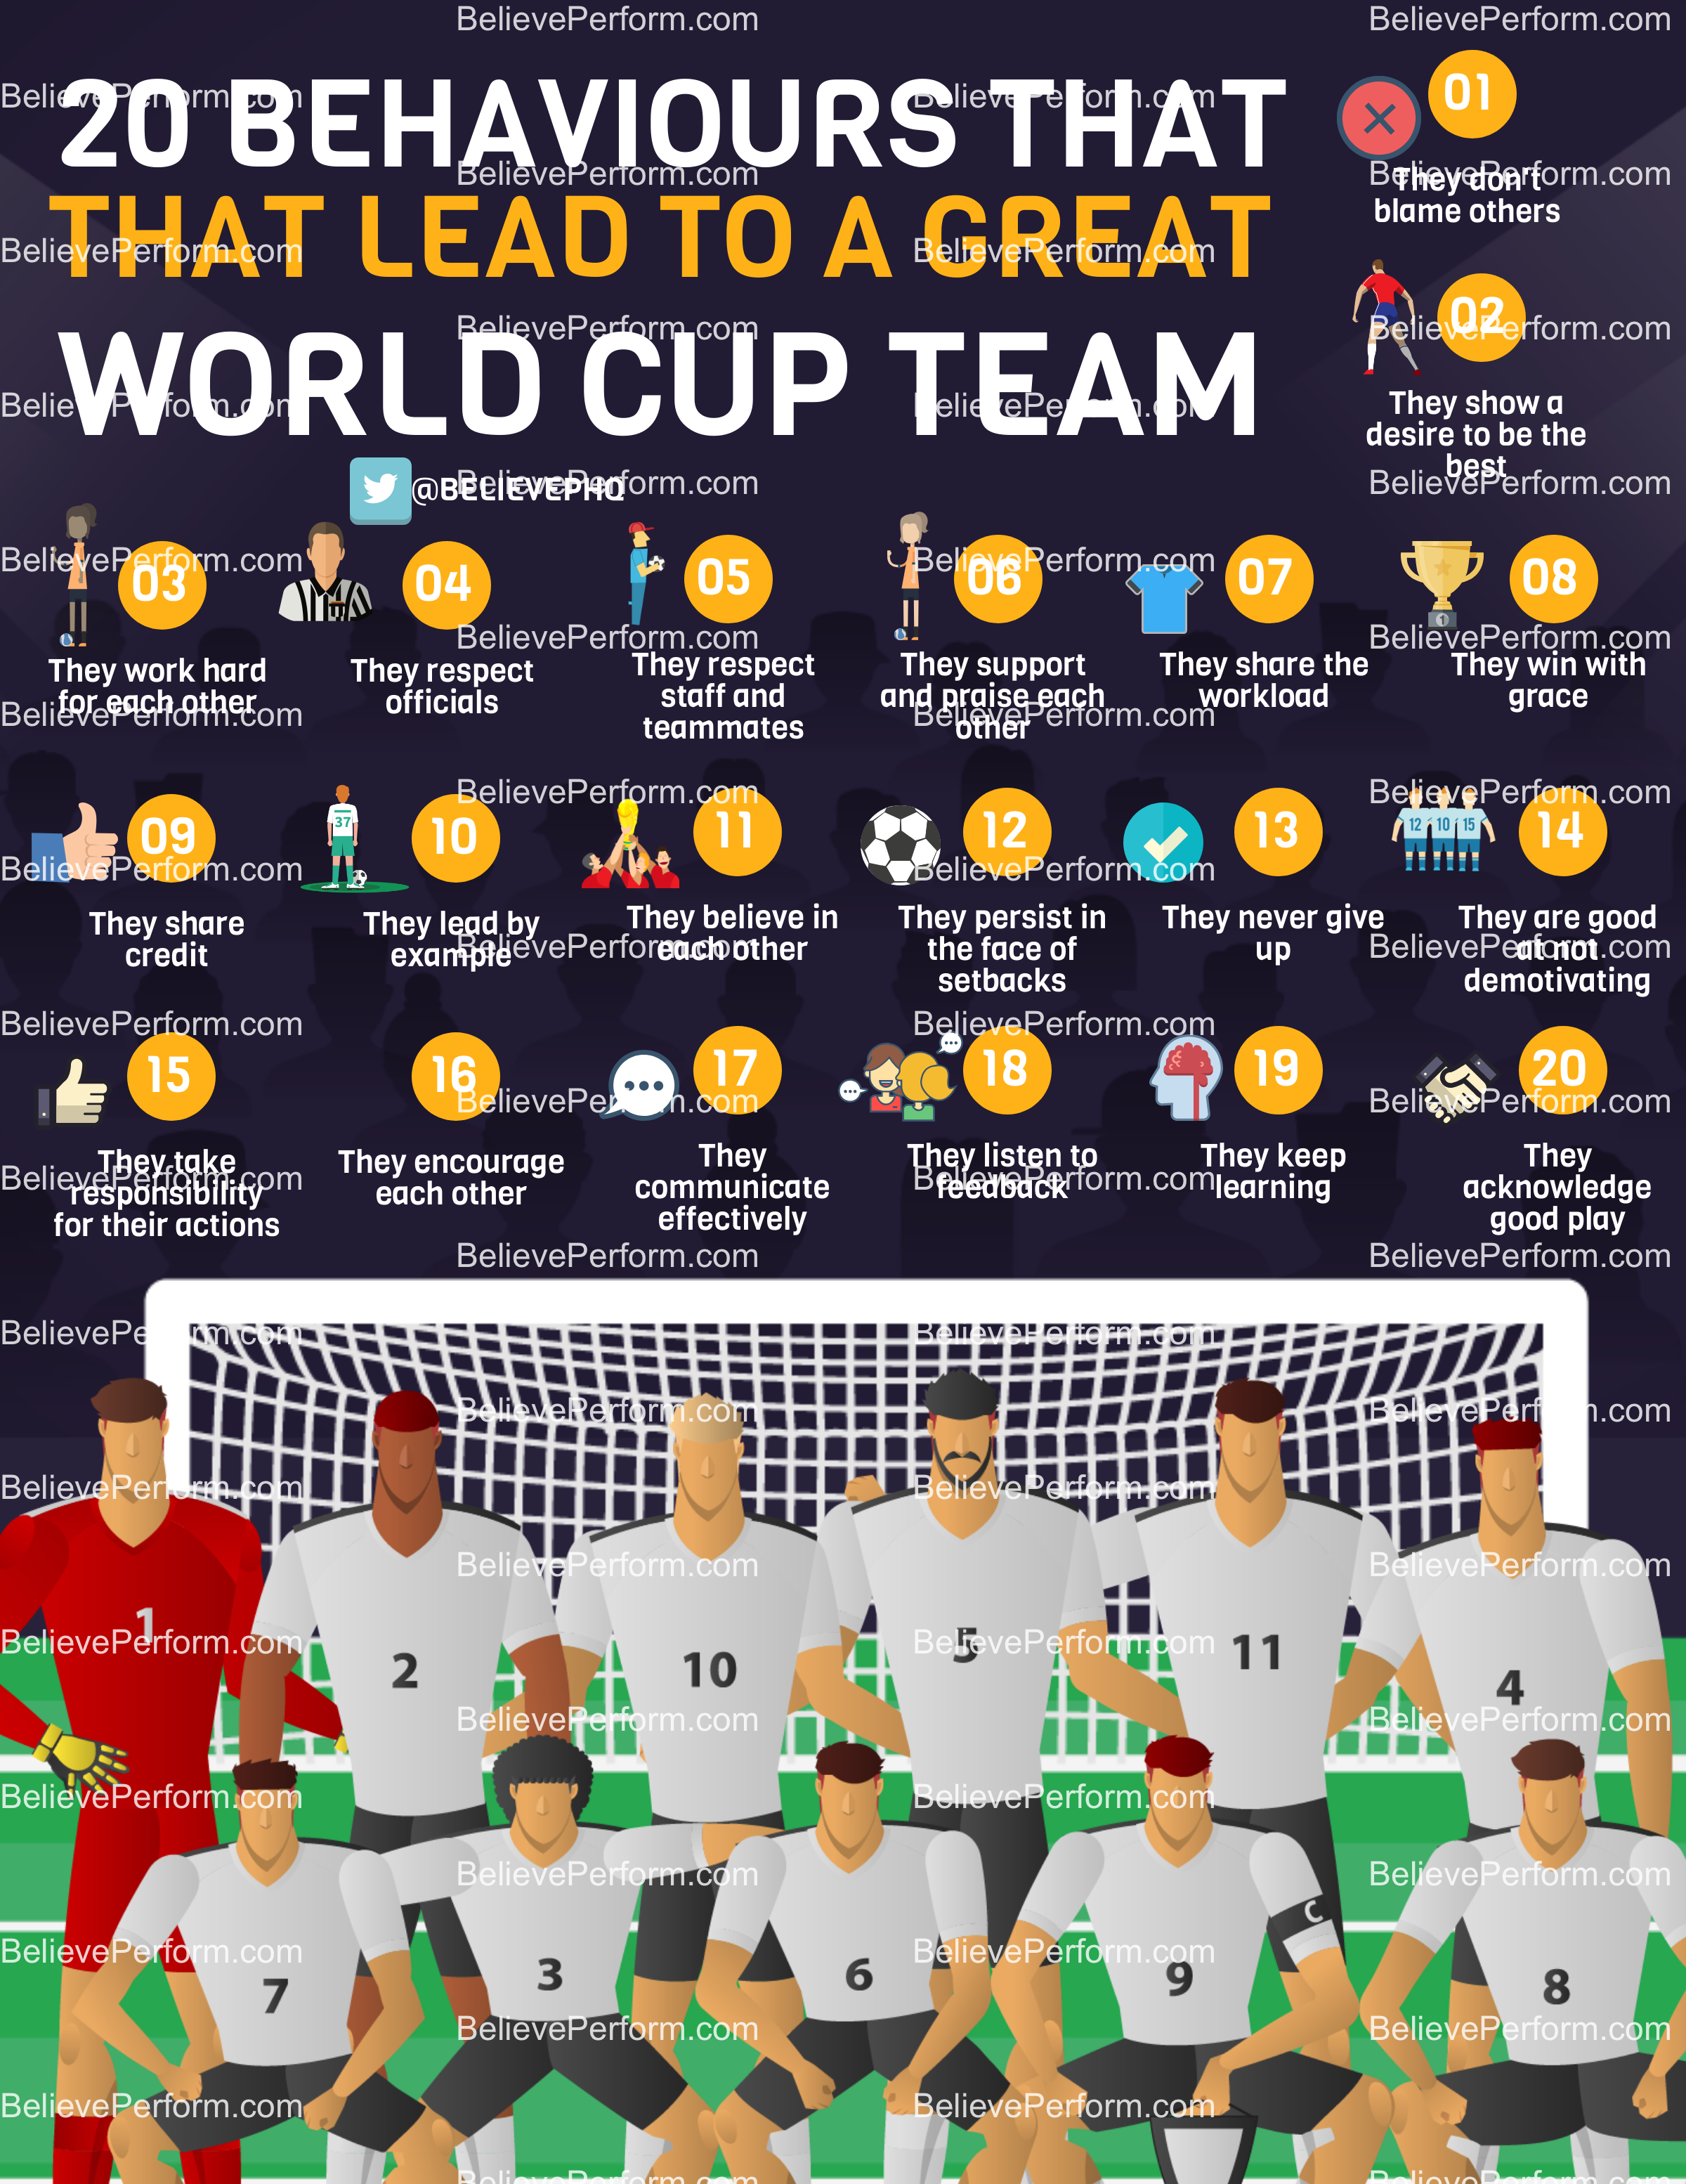 20 behaviours that lead to a great world cup team - BelievePerform